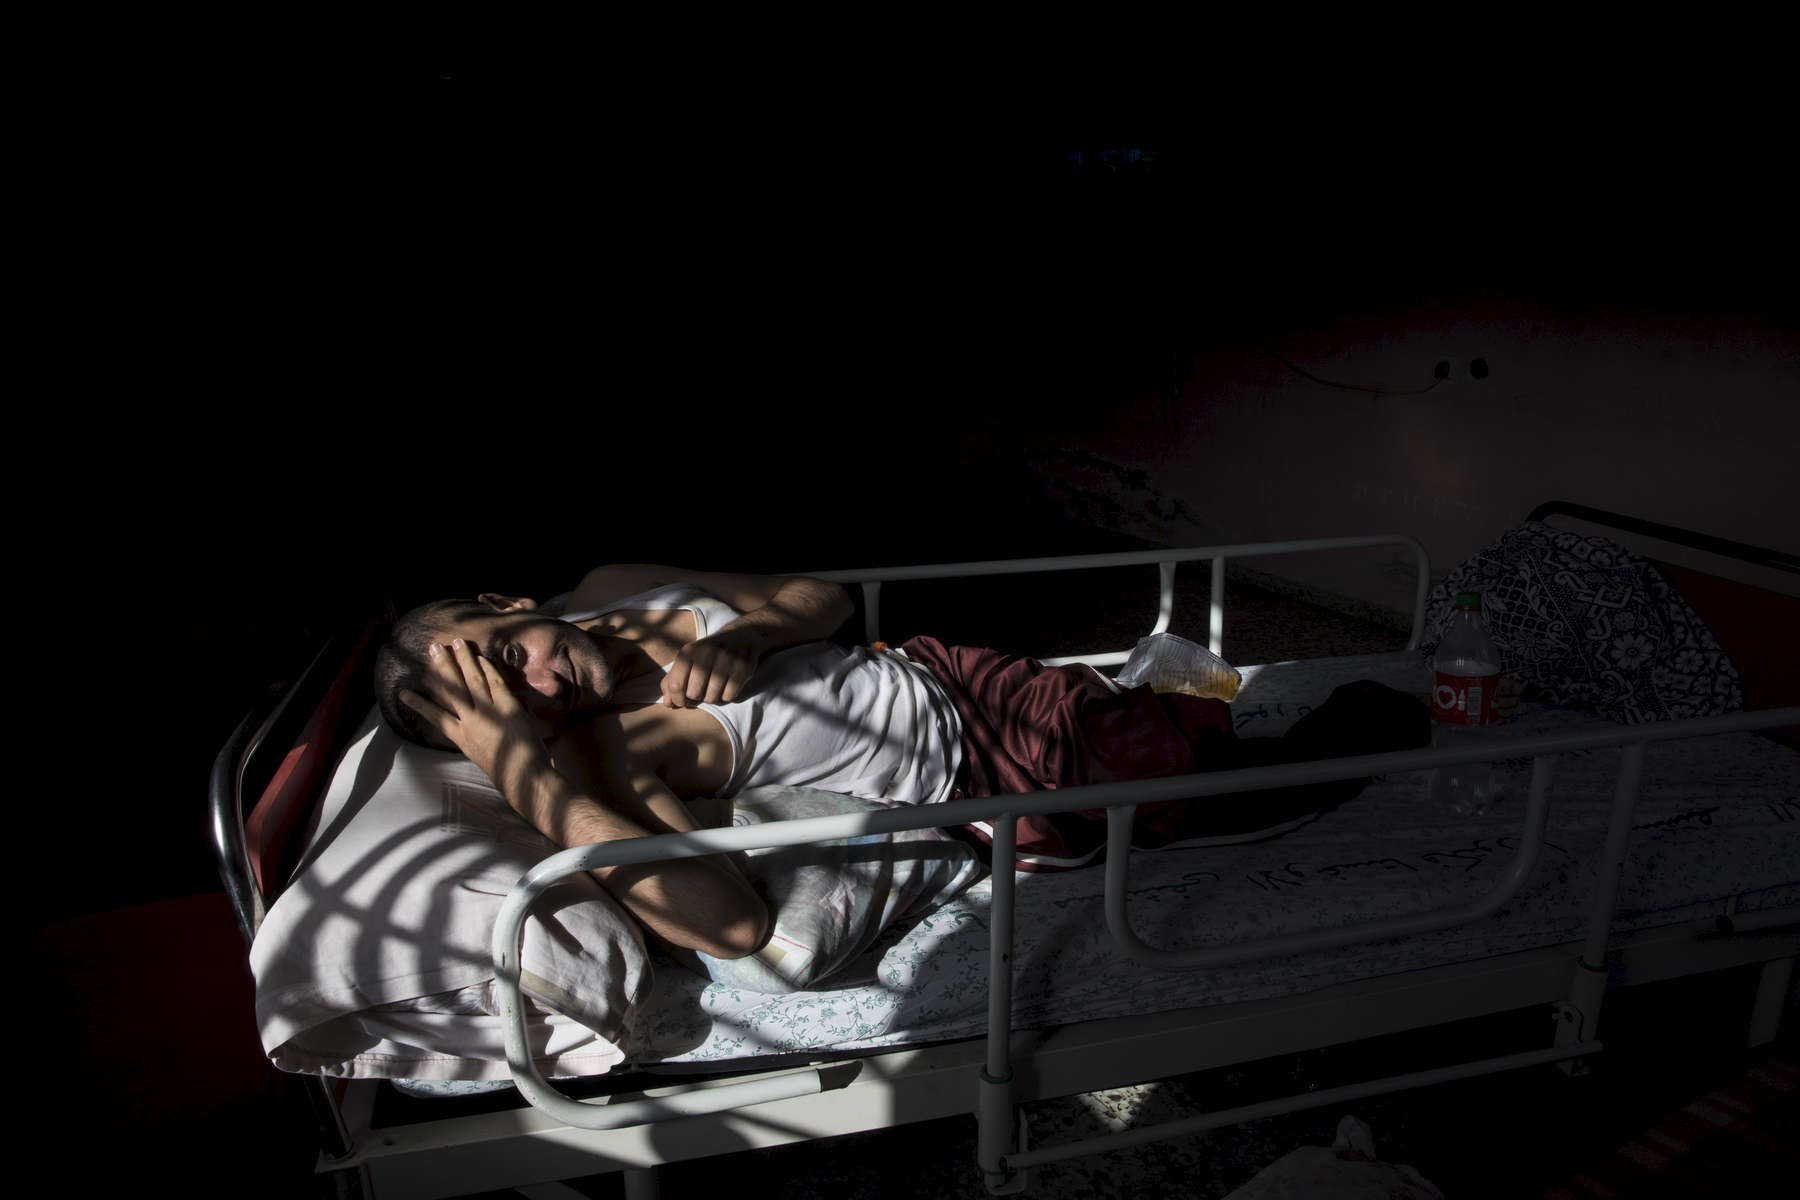 JABALIA, GAZA STRIP- MAY 26,2018 on May 26,2018 in the Gaza strip. Odai Imad Ali, 24, from Jabalia, lost hearing since he was an eight-month baby after suffering meningitis. In 2014, he got injured in his back in a bombing targeted their home's farm led to suffering hemiplegia. He suffers from severe bed sores. Everyone is well aware that Gaza's two million inhabitants are trapped in a cycle of violence and poverty, created by policies and political decisions on both sides. The problems and complications affecting Gaza today are overwhelming. The world, seemingly accustomed to the suffering of the Gazan people turns a blind eye. (Photo by Paula Bronstein ) 